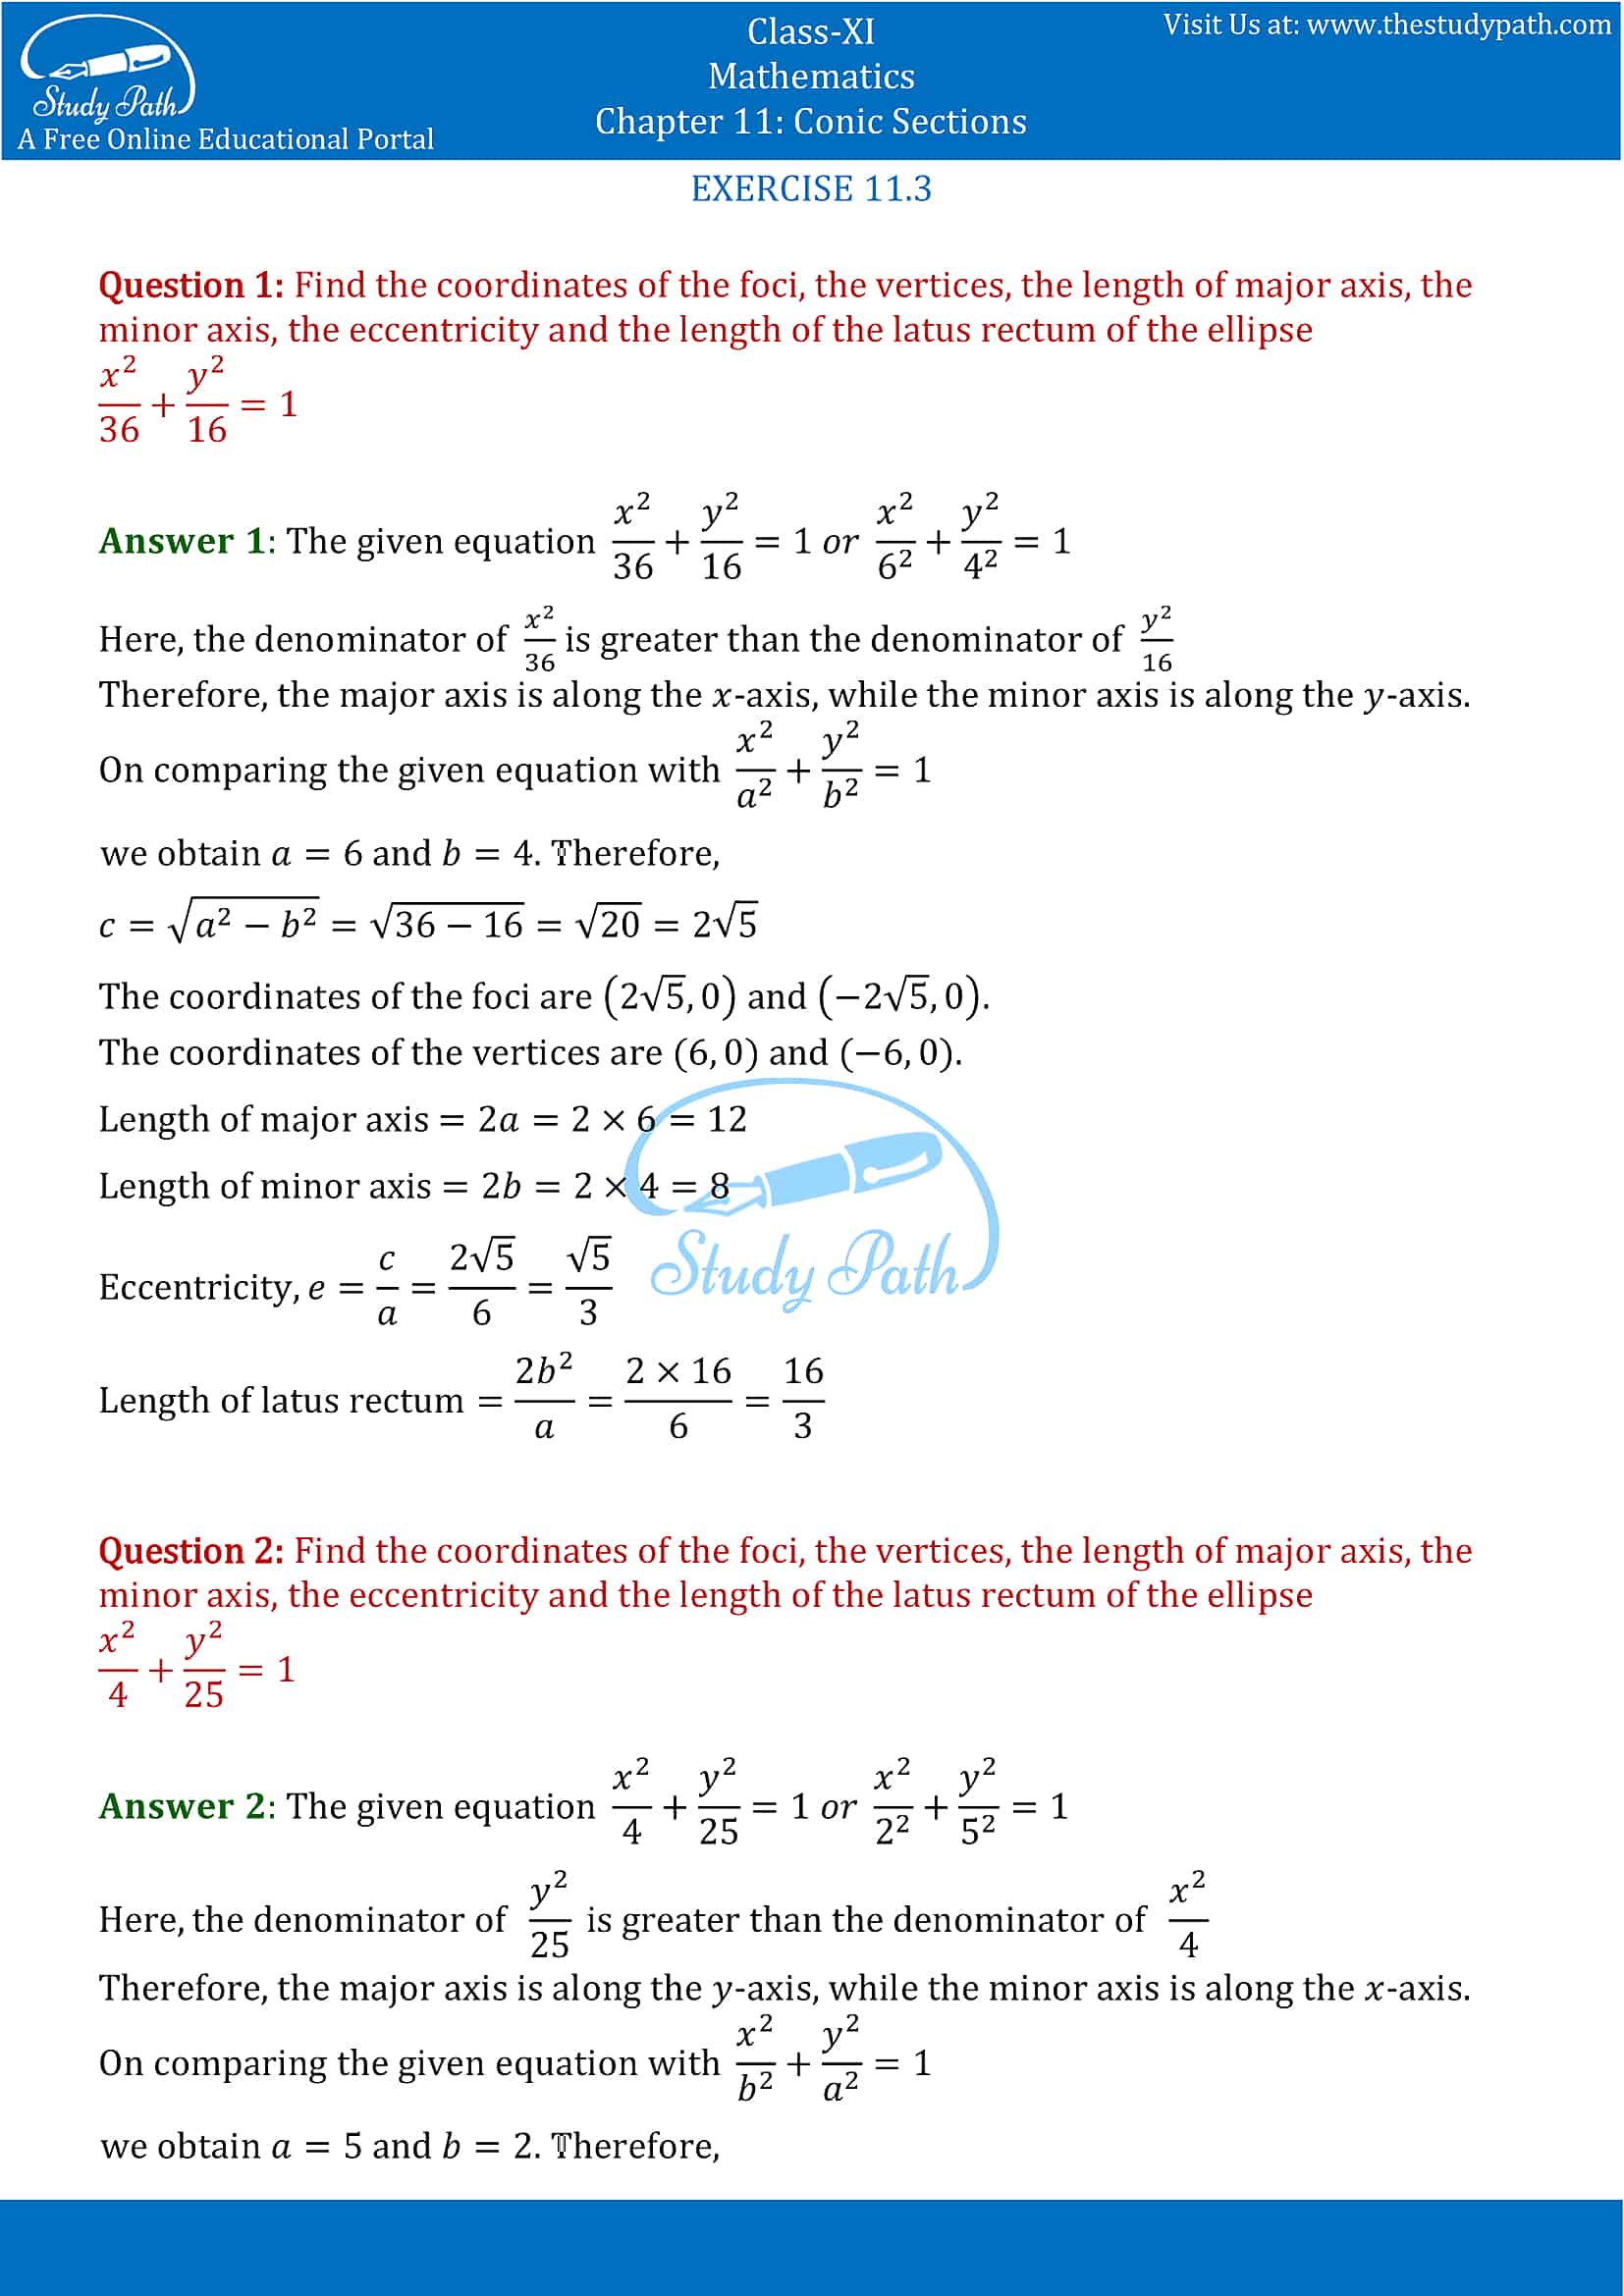 NCERT Solutions for Class 11 Maths chapter 11 Conic Section Exercise 11.3 Part-1